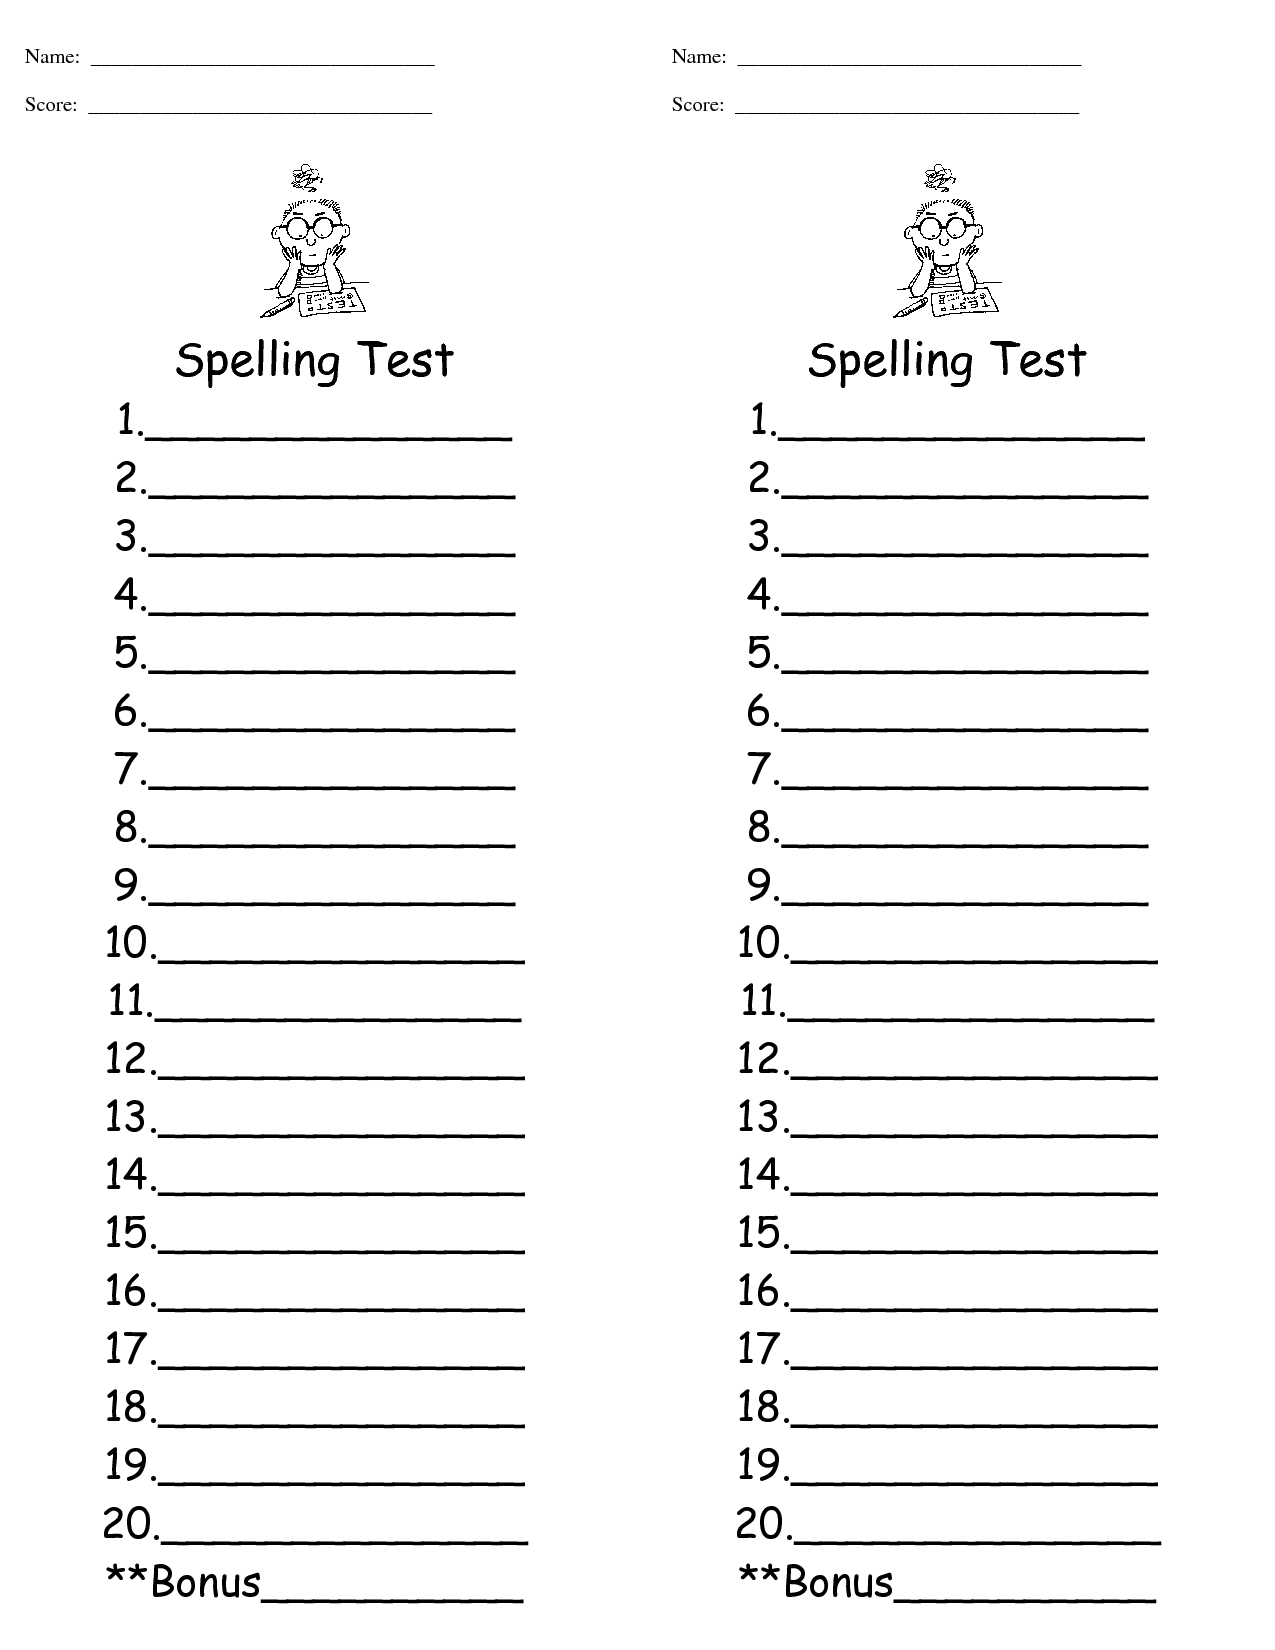 3rd Grade Spelling Test Template Image